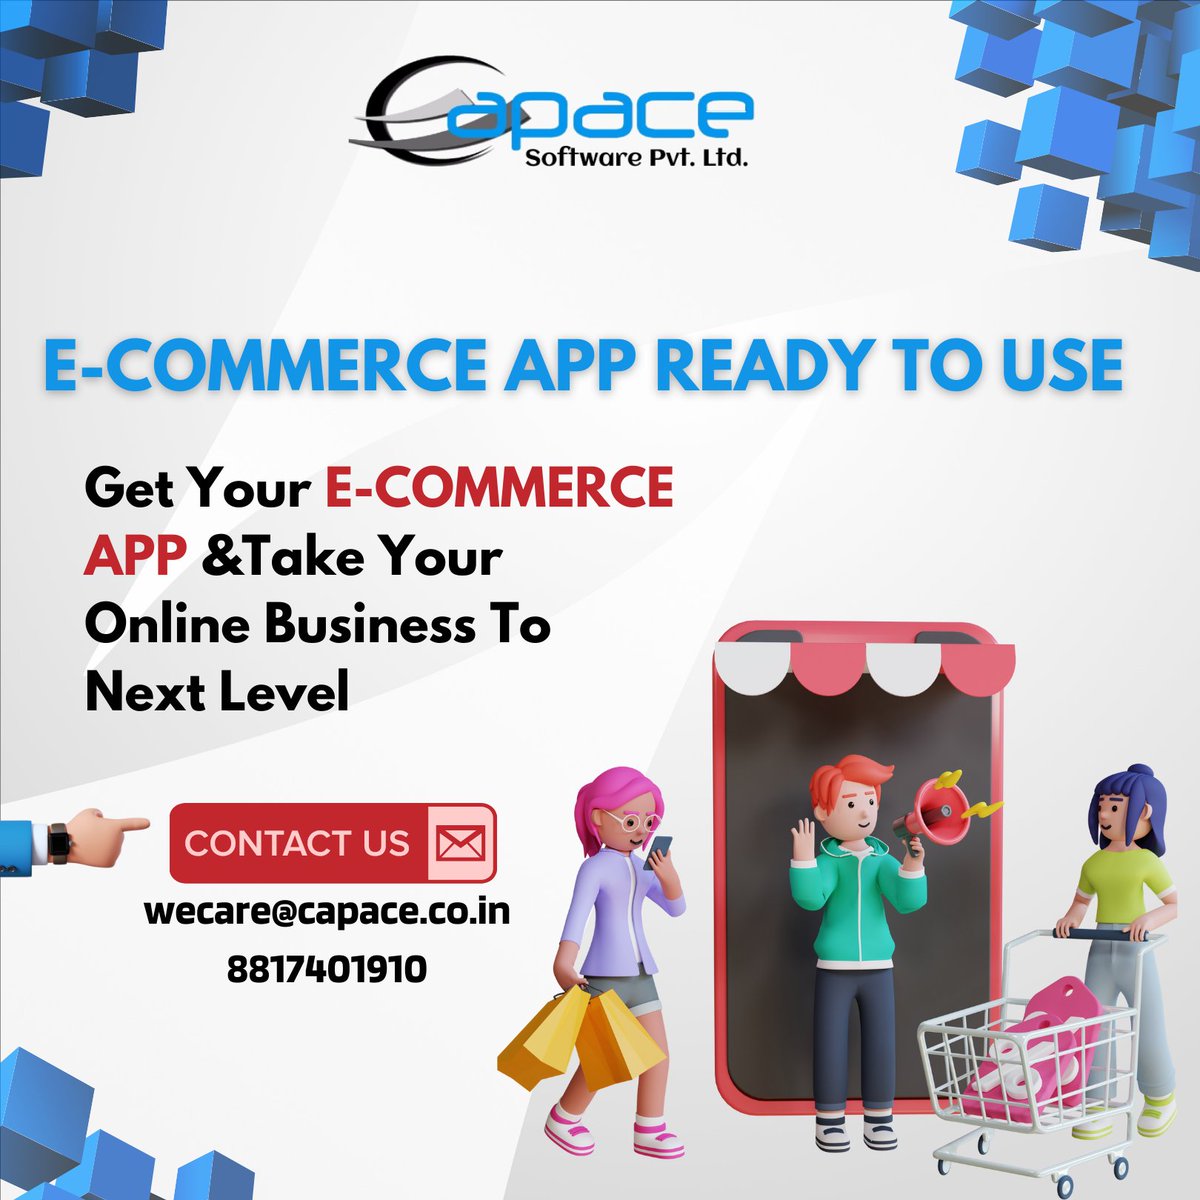 The best way to dive deep into the eCommerce business should have an e-commerce app that helps in doing business online
contact us on  wecare@capace.co.in
/Whatsapp me @ 8817401910 

#ecommerce#ecomercebusiness#ecommercetips#eccomercelife#ecommerceapplication#capacesoftware